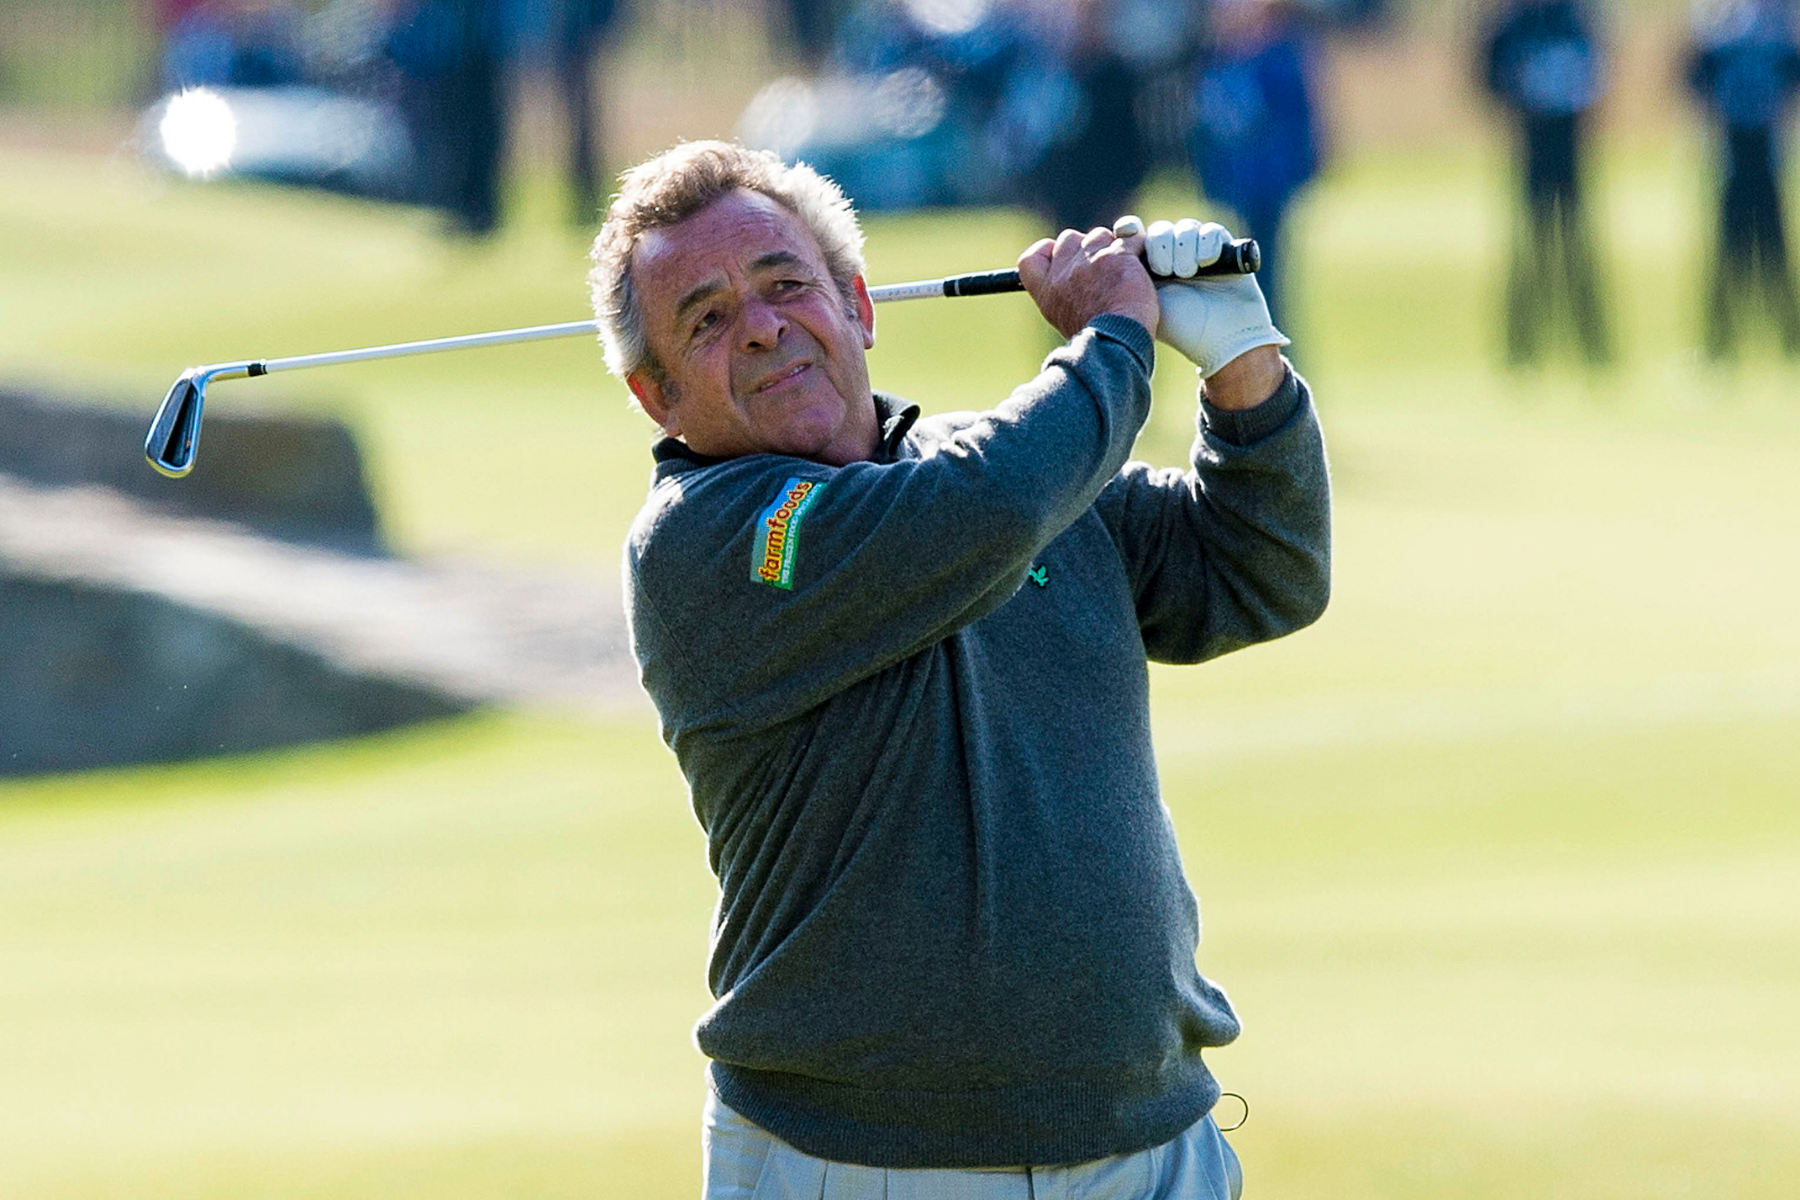 Ryder Cup: Tony Jacklin reflects on the 'embarrassment' of losing sole of his shoe in 1975